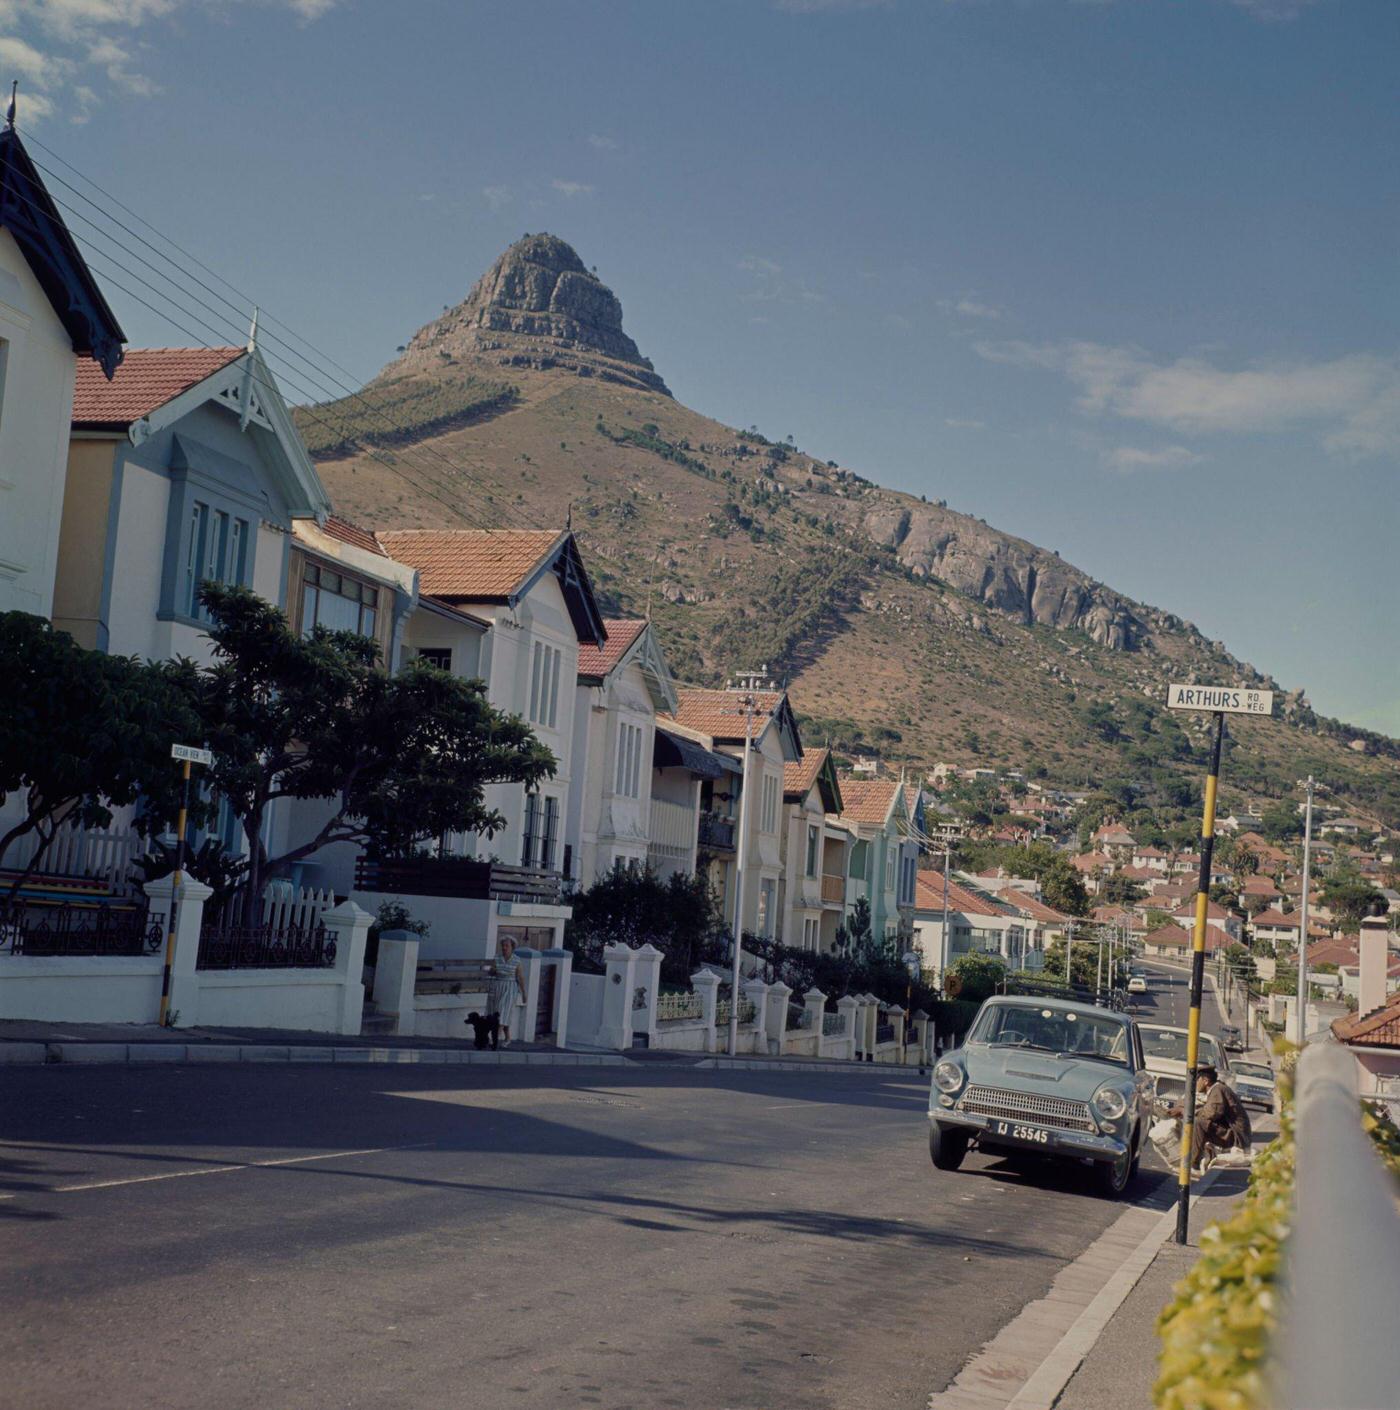 A pedestrian walks past cars parked on Arthurs Road in the Seapoint district of the city of Cape Town in Cape Province (later Western Cape) in South Africa in 1966.